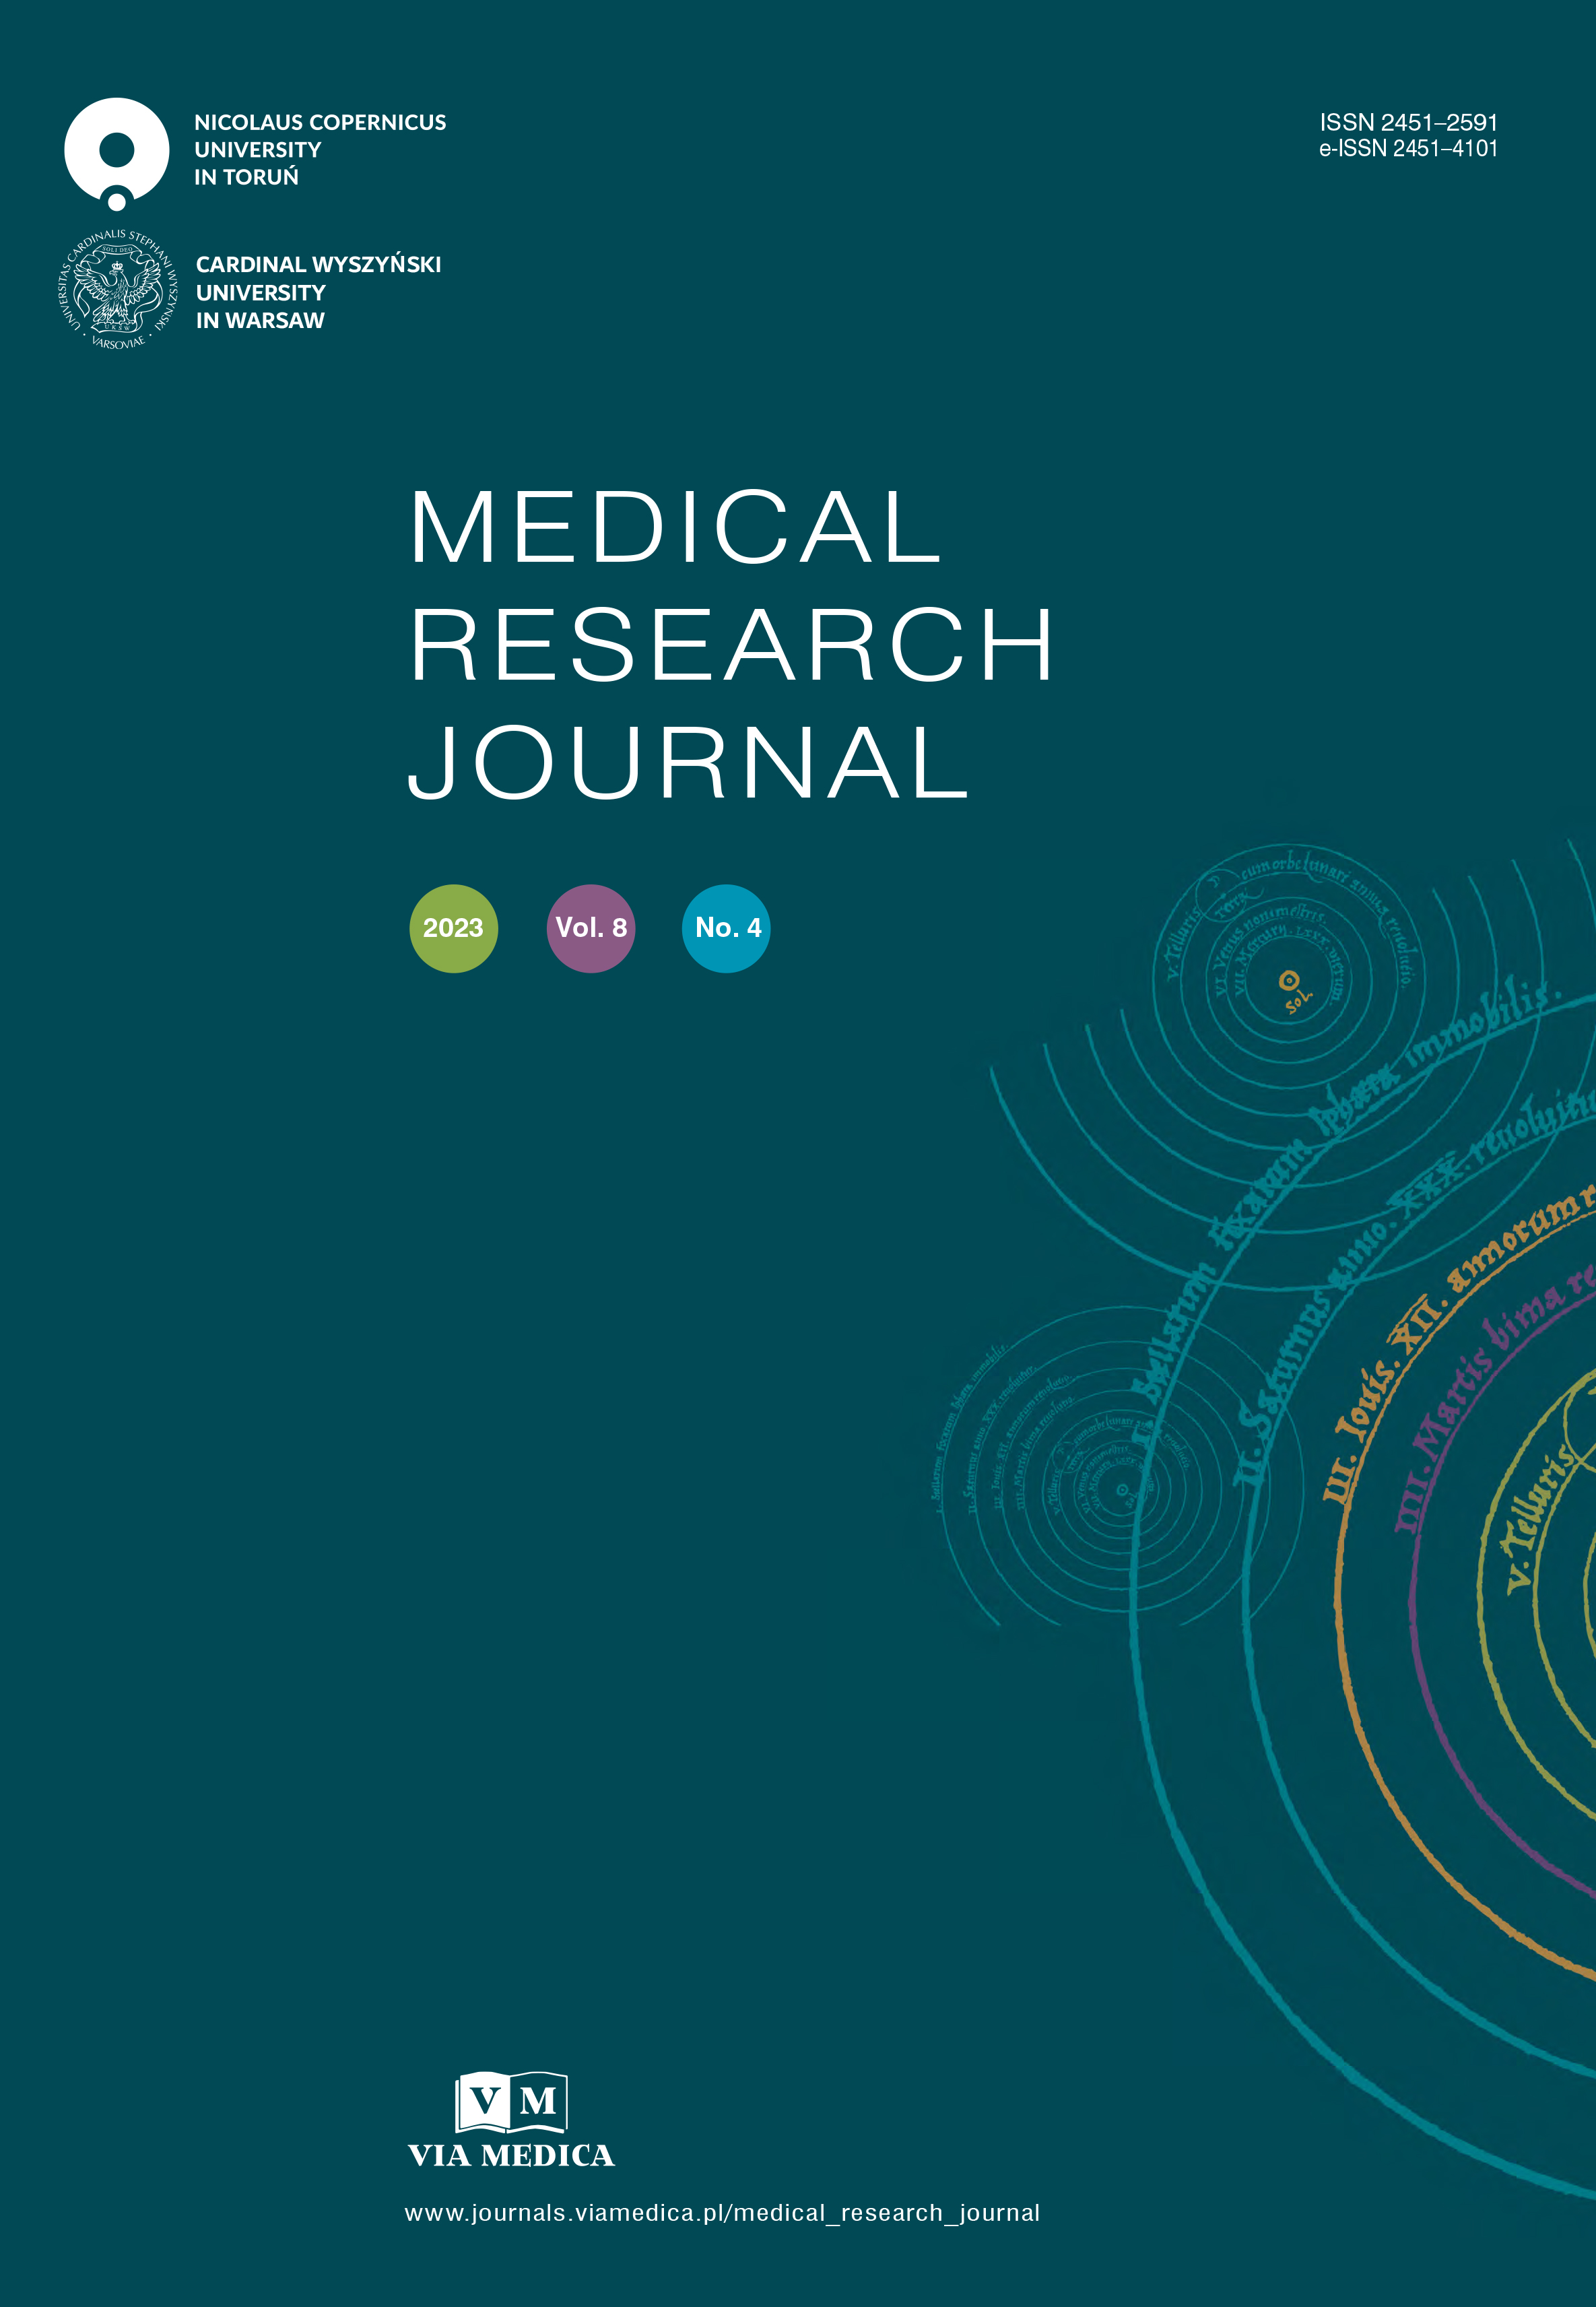 current medical research and opinion journal